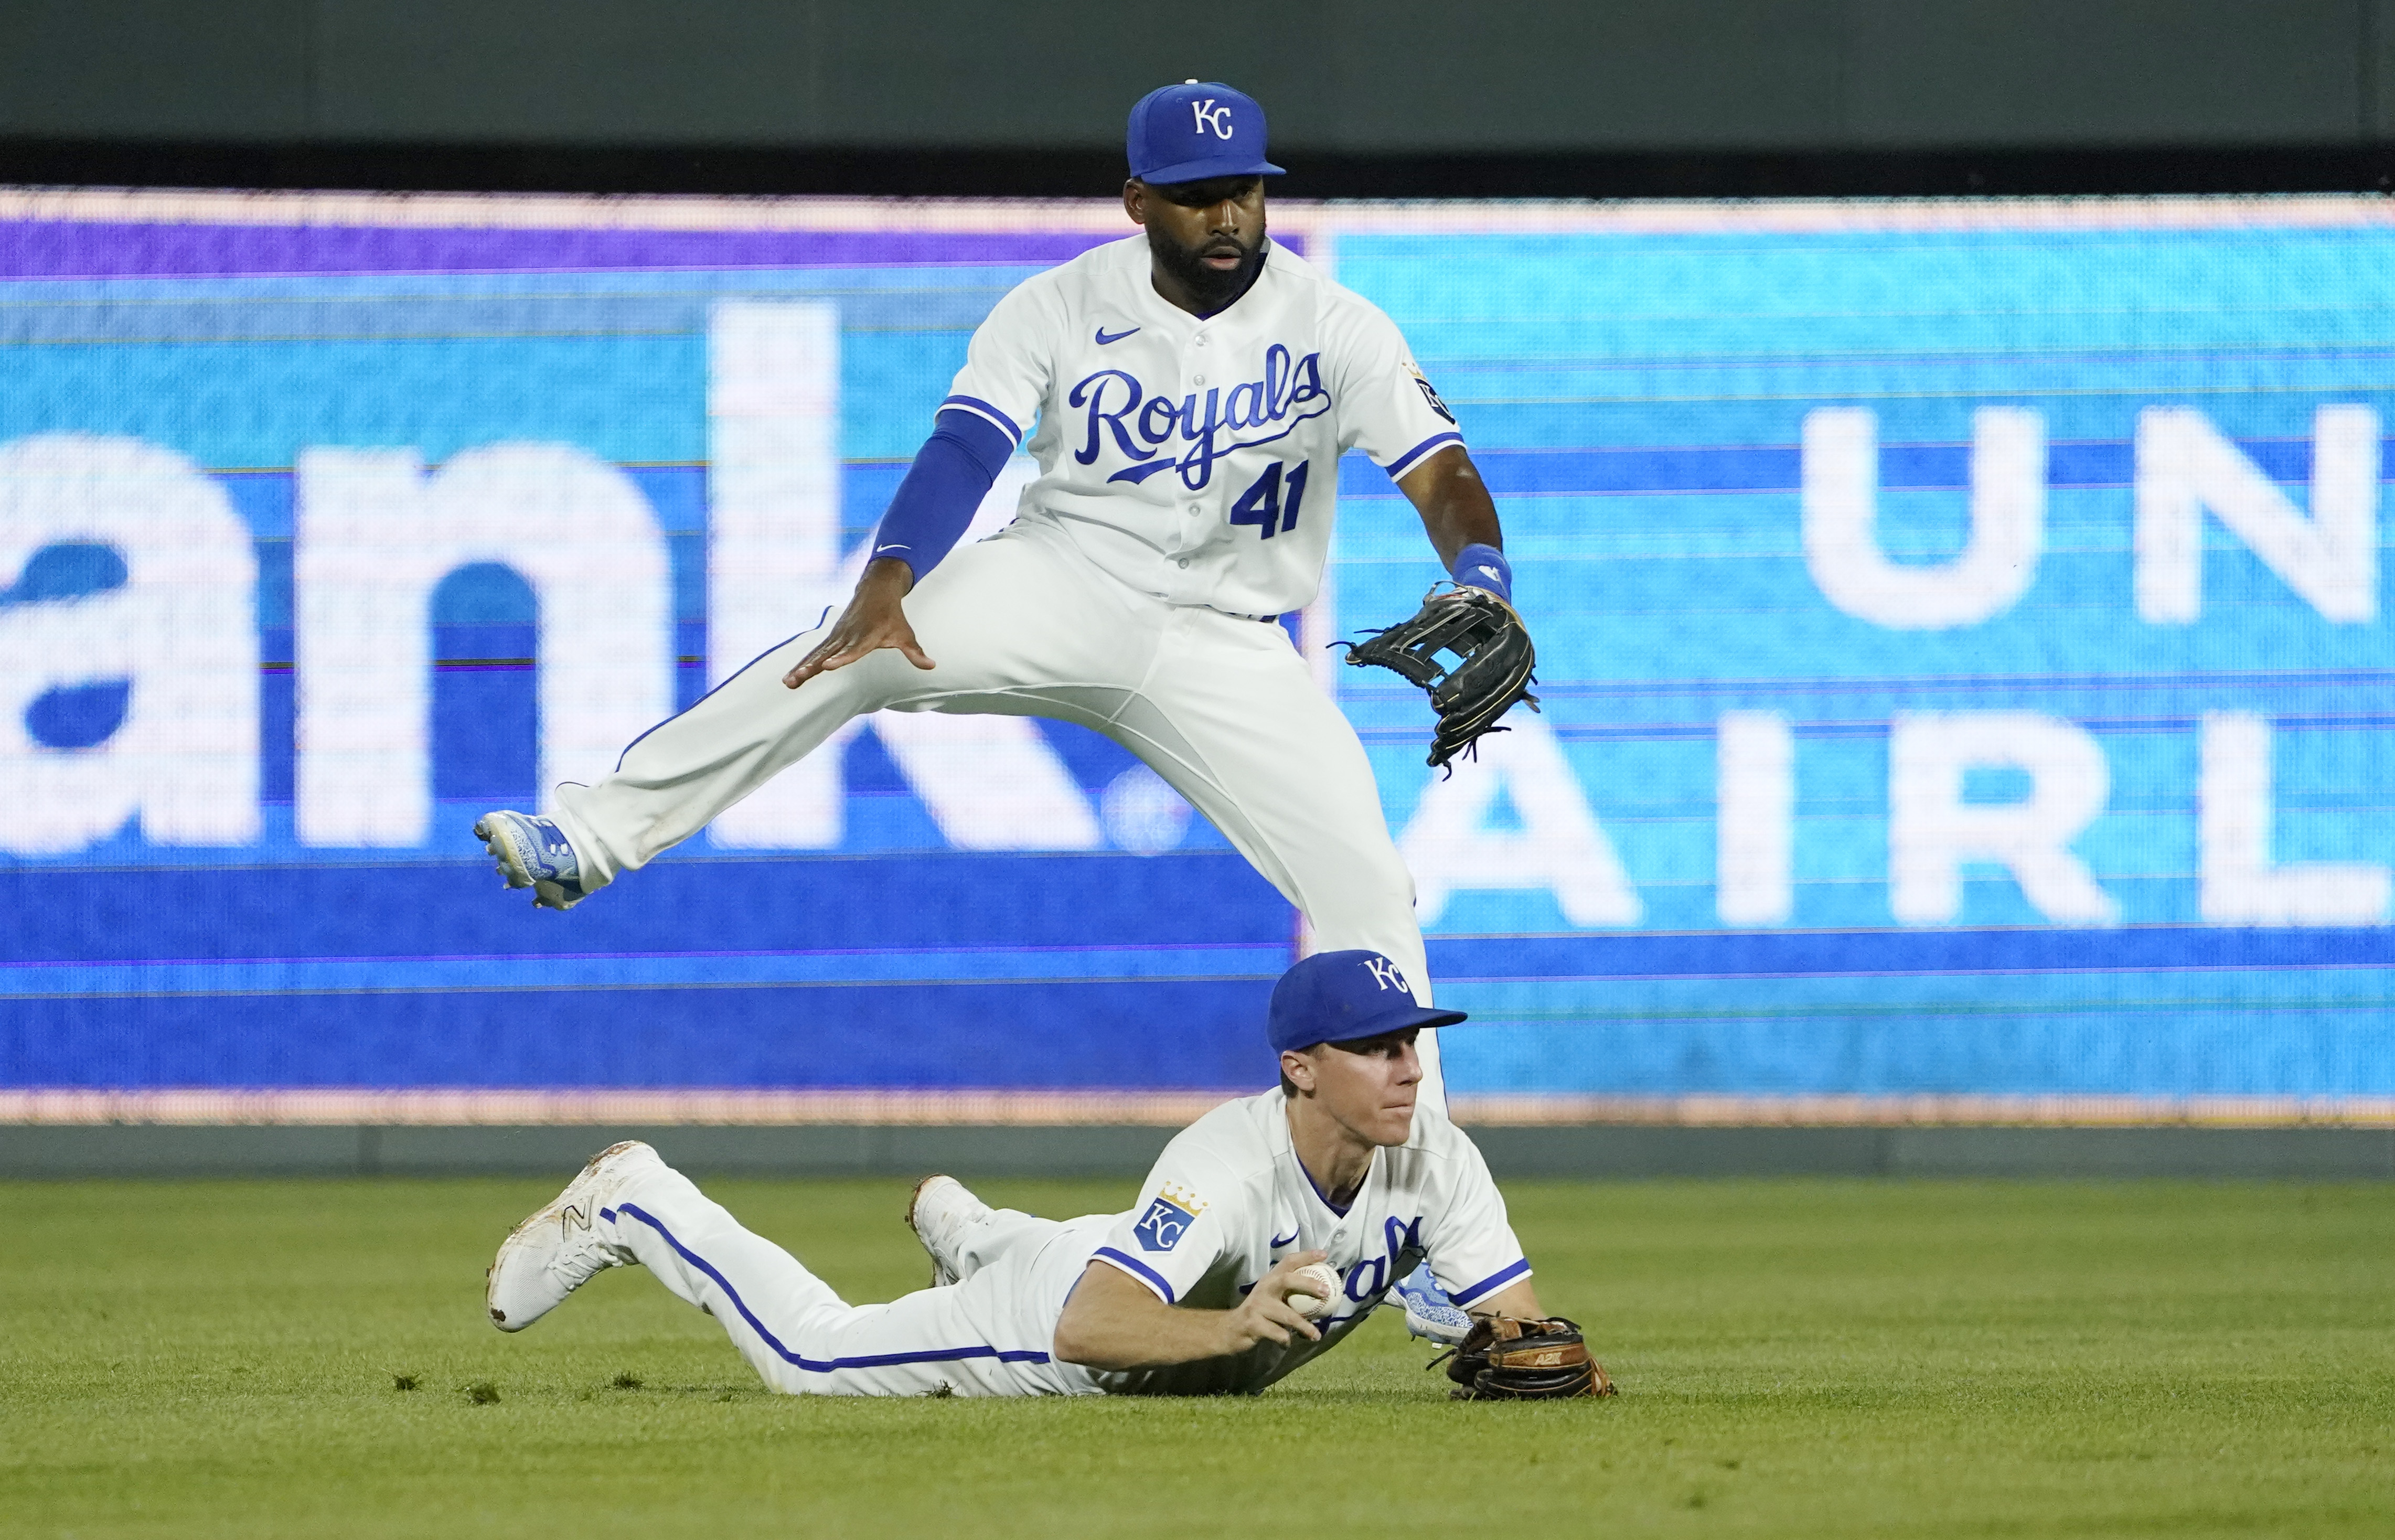 Matt Duffy #15 of the Kansas City Royals, backed up by Jackie Bradley Jr. #41, fields a ball off the bat of Spencer Torkelson of the Detroit Tigers avoids a collision in the eighth inning at Kauffman Stadium on May 24, 2023 in Kansas City, Missouri.